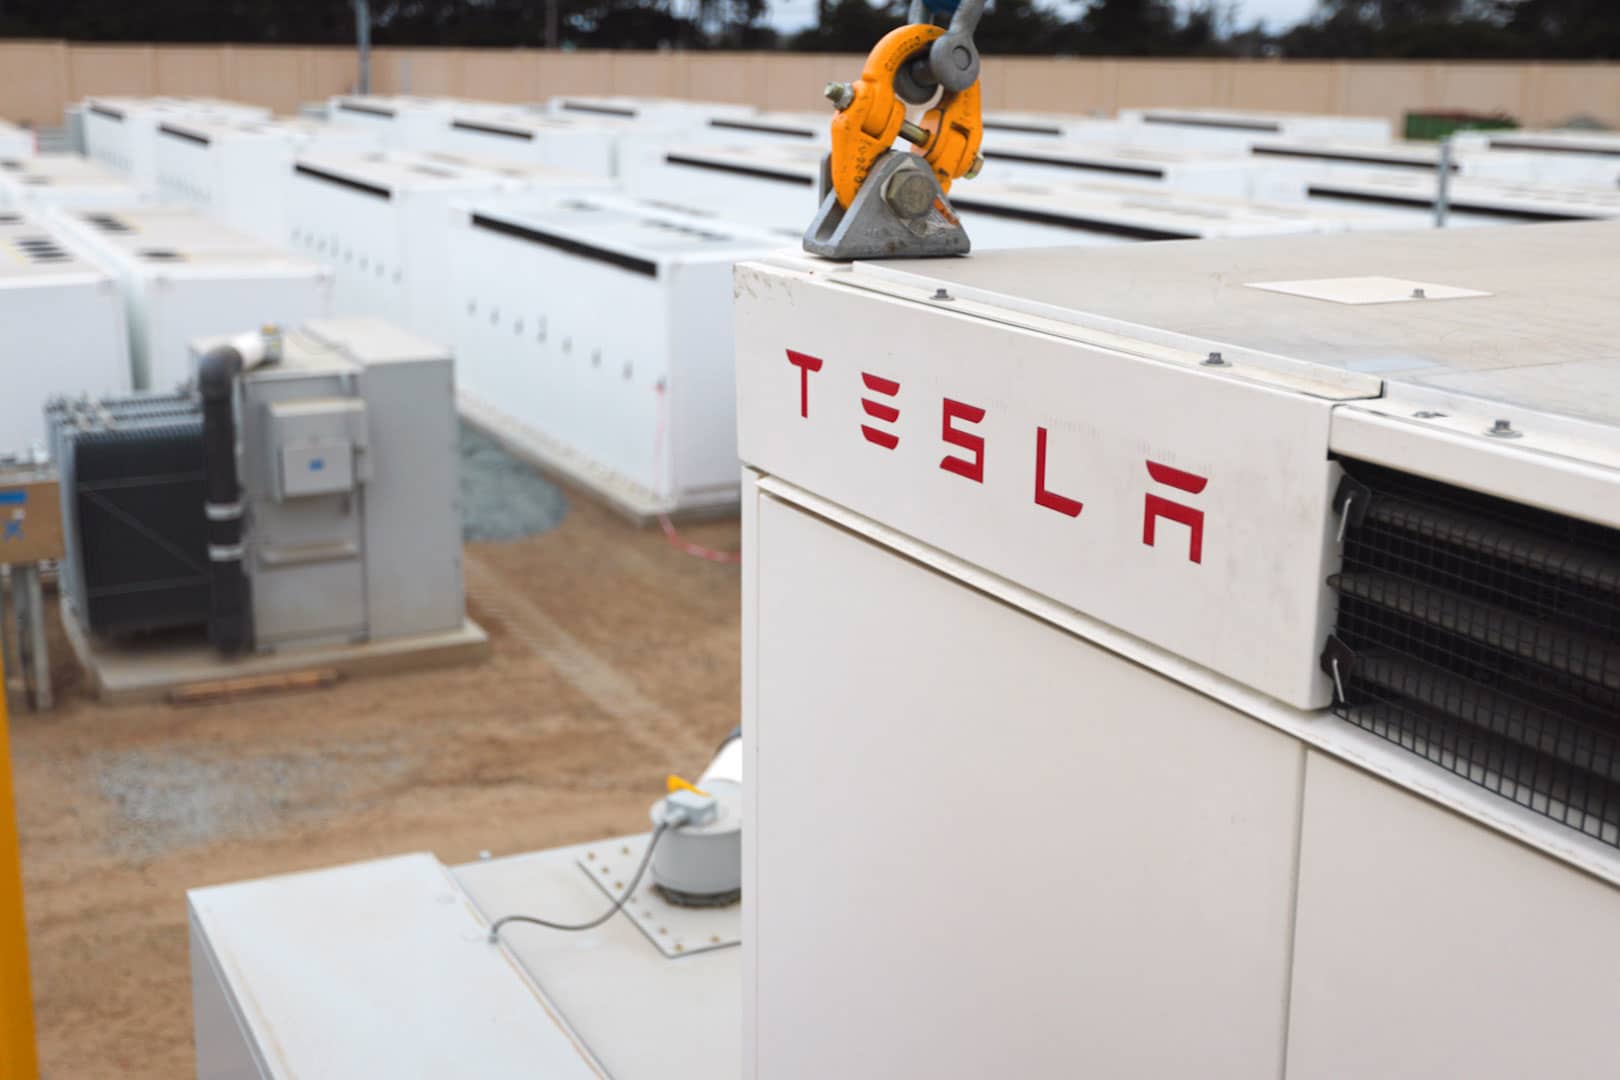 Tesla Megapack fire highlights early-stage issues with ‘big batteries’